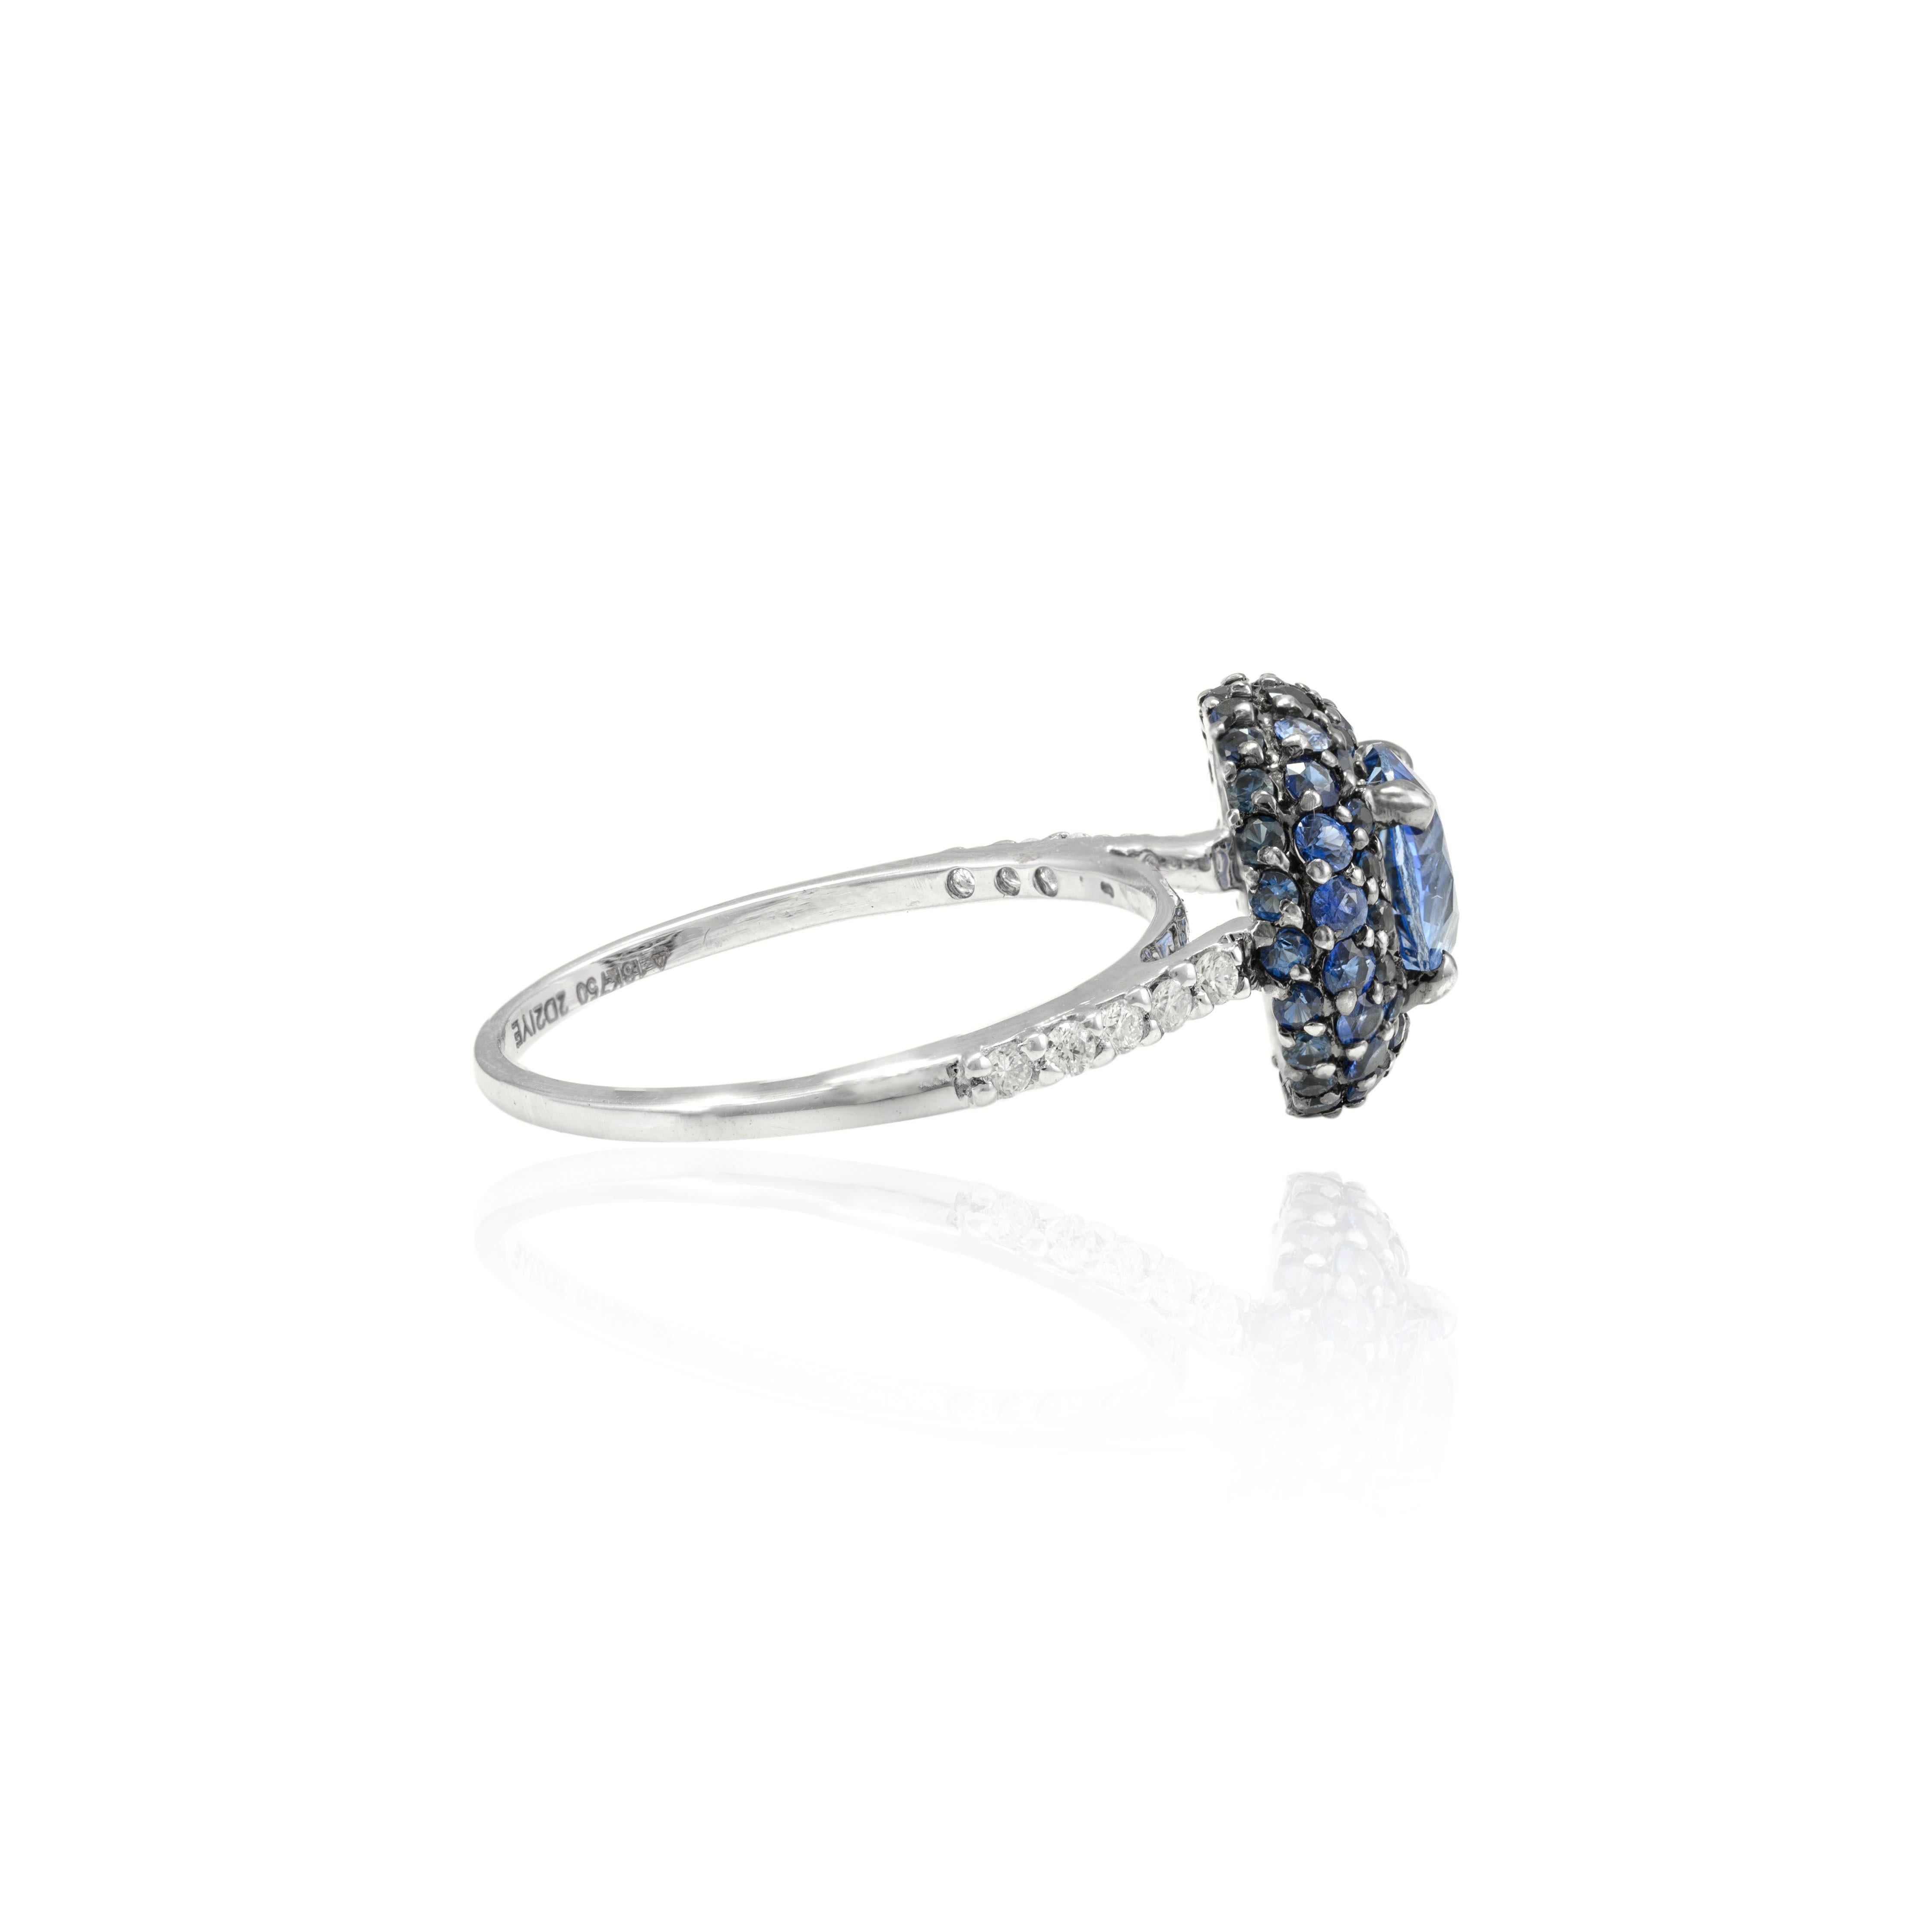 For Sale:  2.58 Ct Round Pave Blue Sapphire Ring in 18k Solid White Gold with Diamonds 6